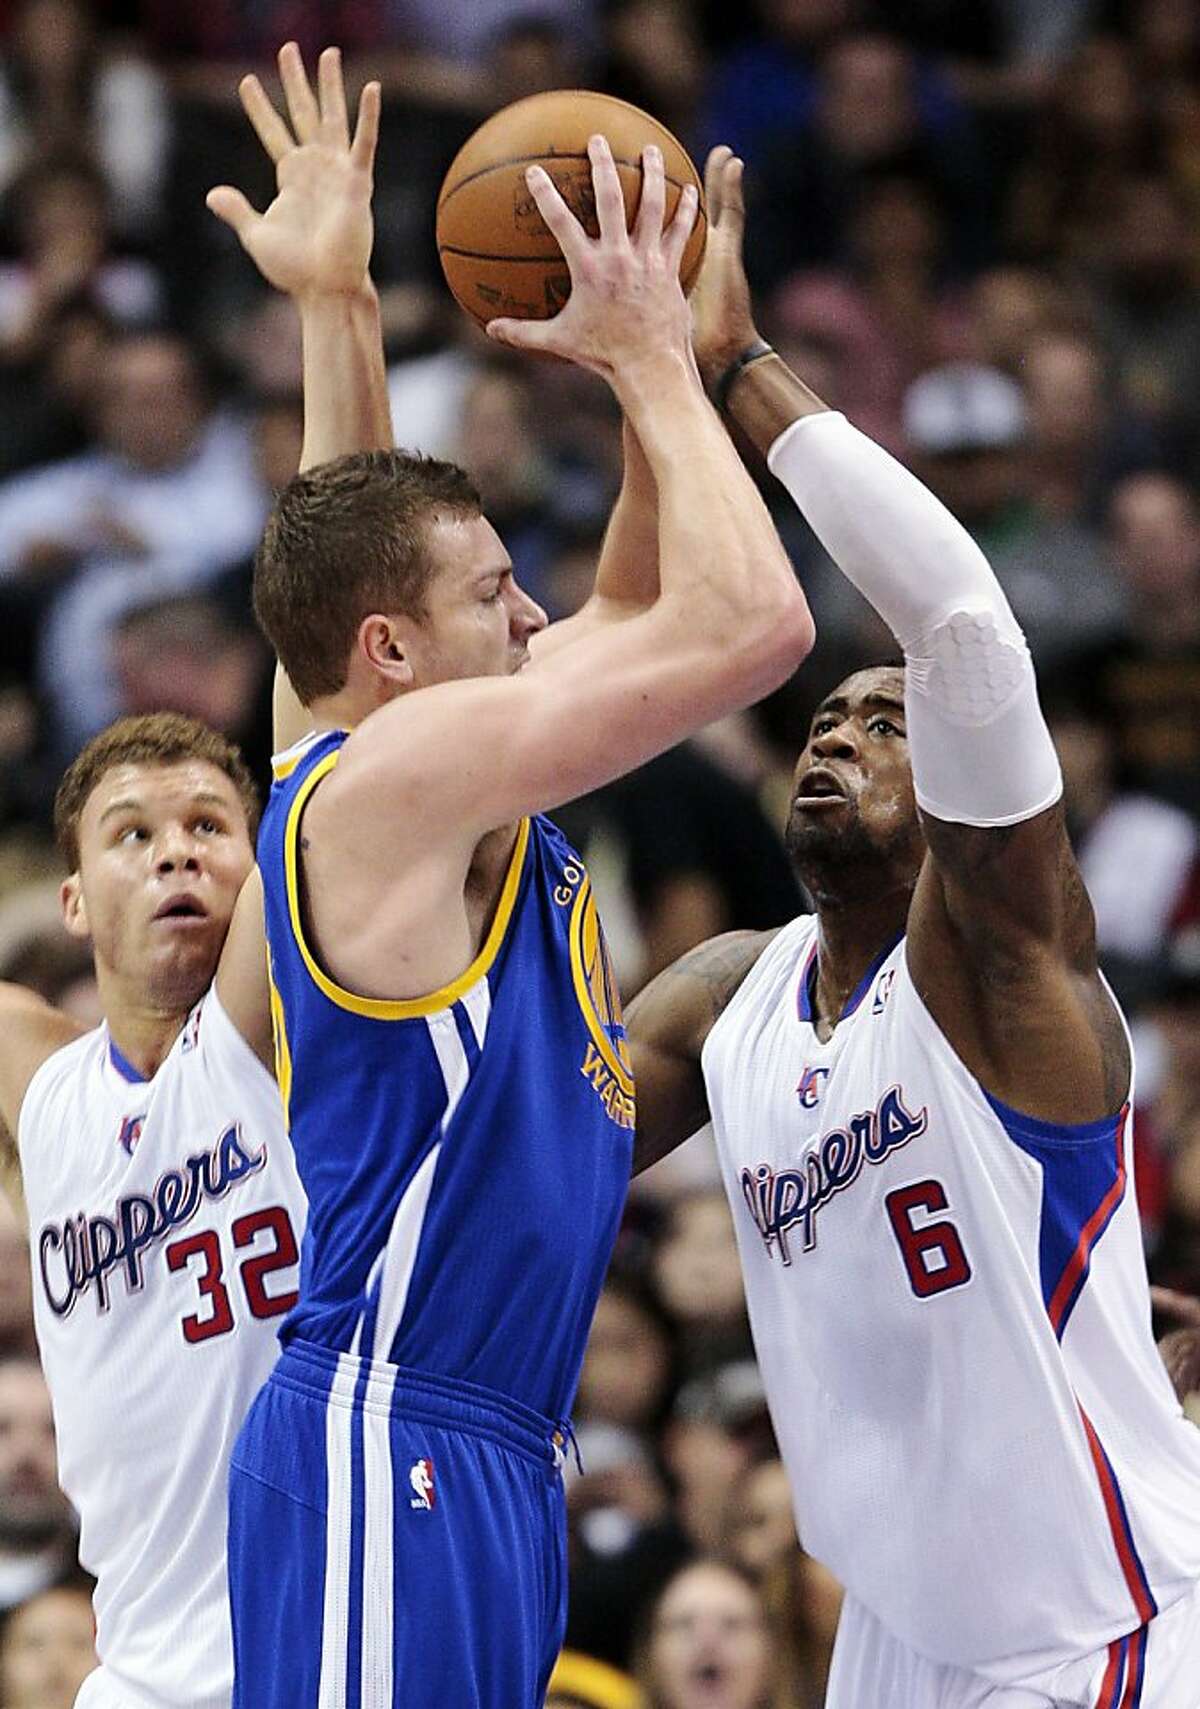 Golden State Warriors' David Lee, center, shoots between Los Angeles Clippers' Blake Griffin (32) and DeAndre Jordan (6) defend in the first half of an NBA basketball game, Sunday, March 11, 2012, in Los Angeles. (AP Photo/Jason Redmond)